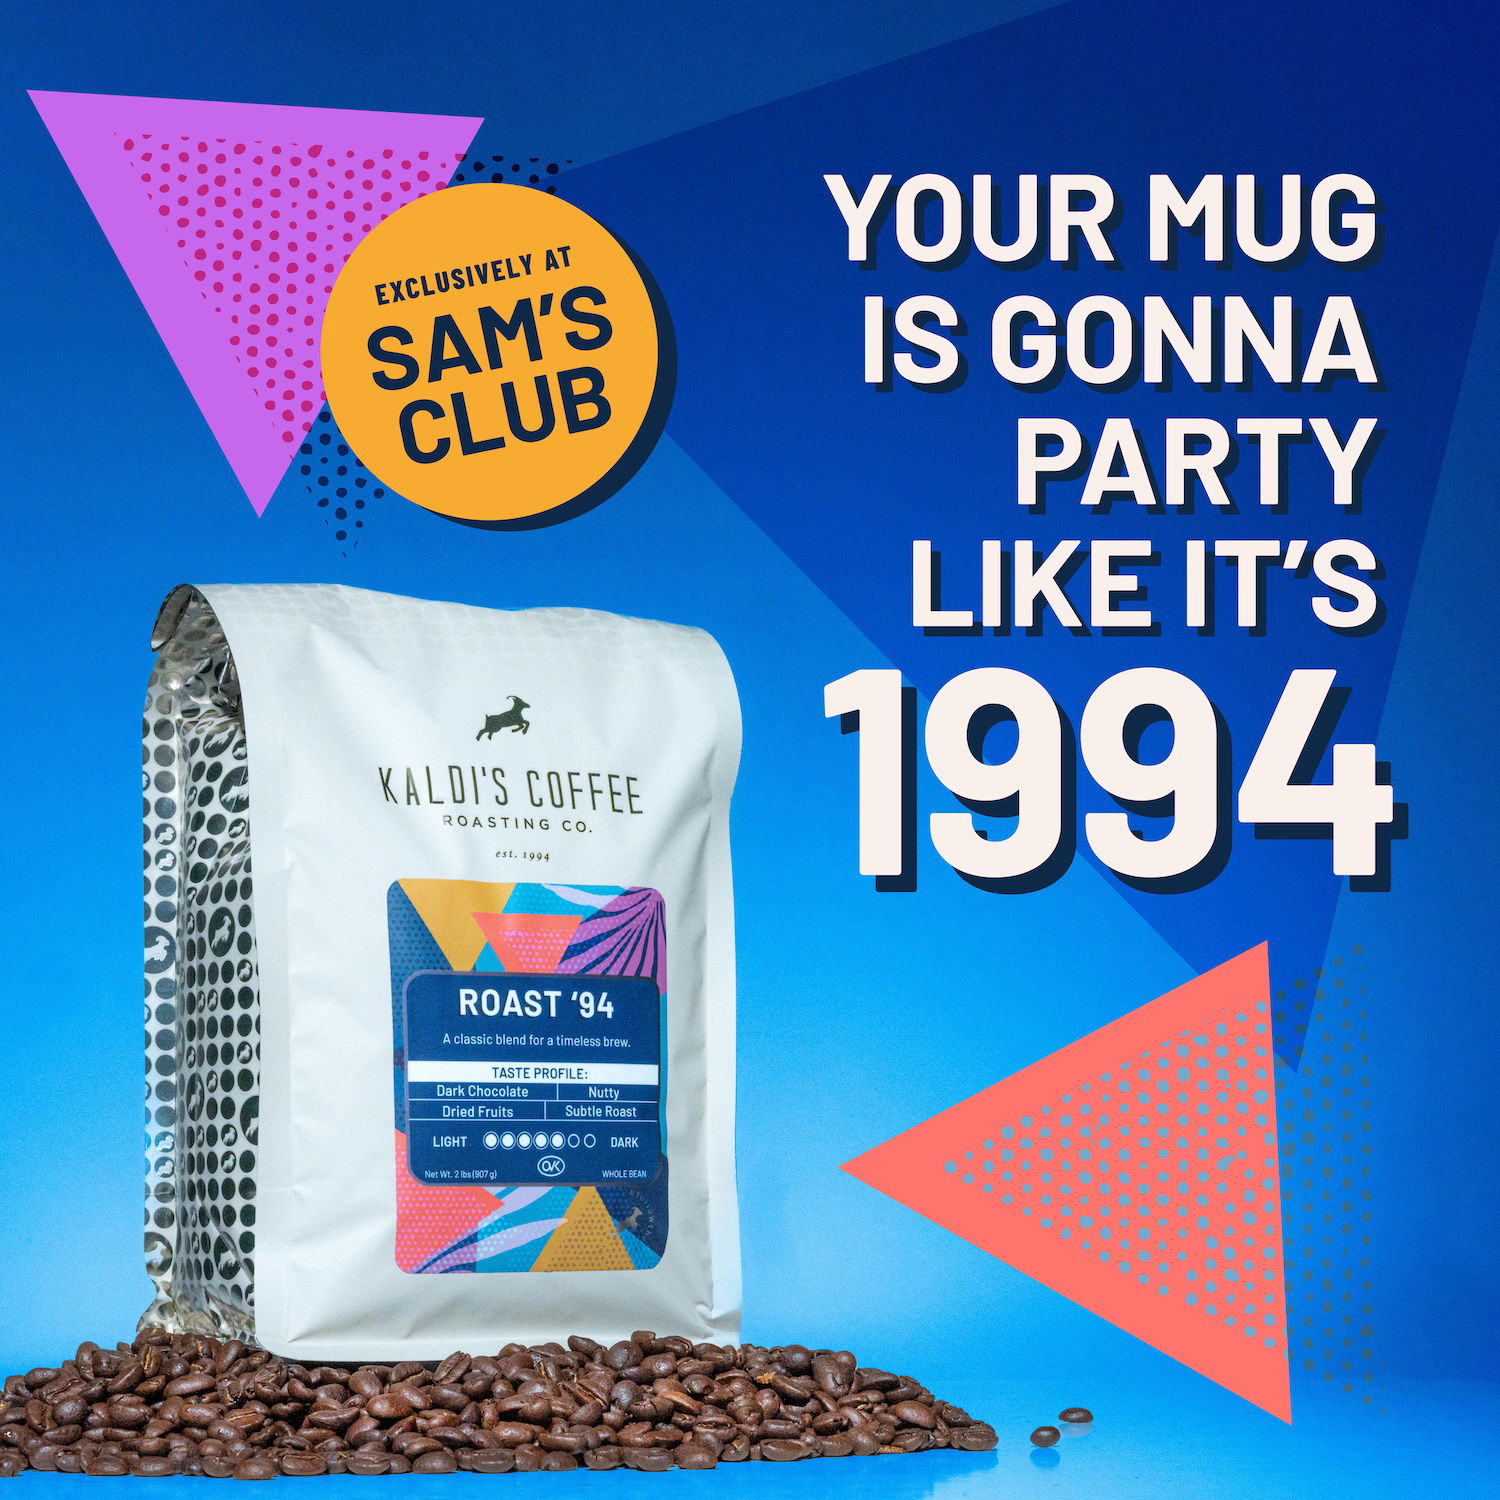 Your mug is gonna party like it's 1994